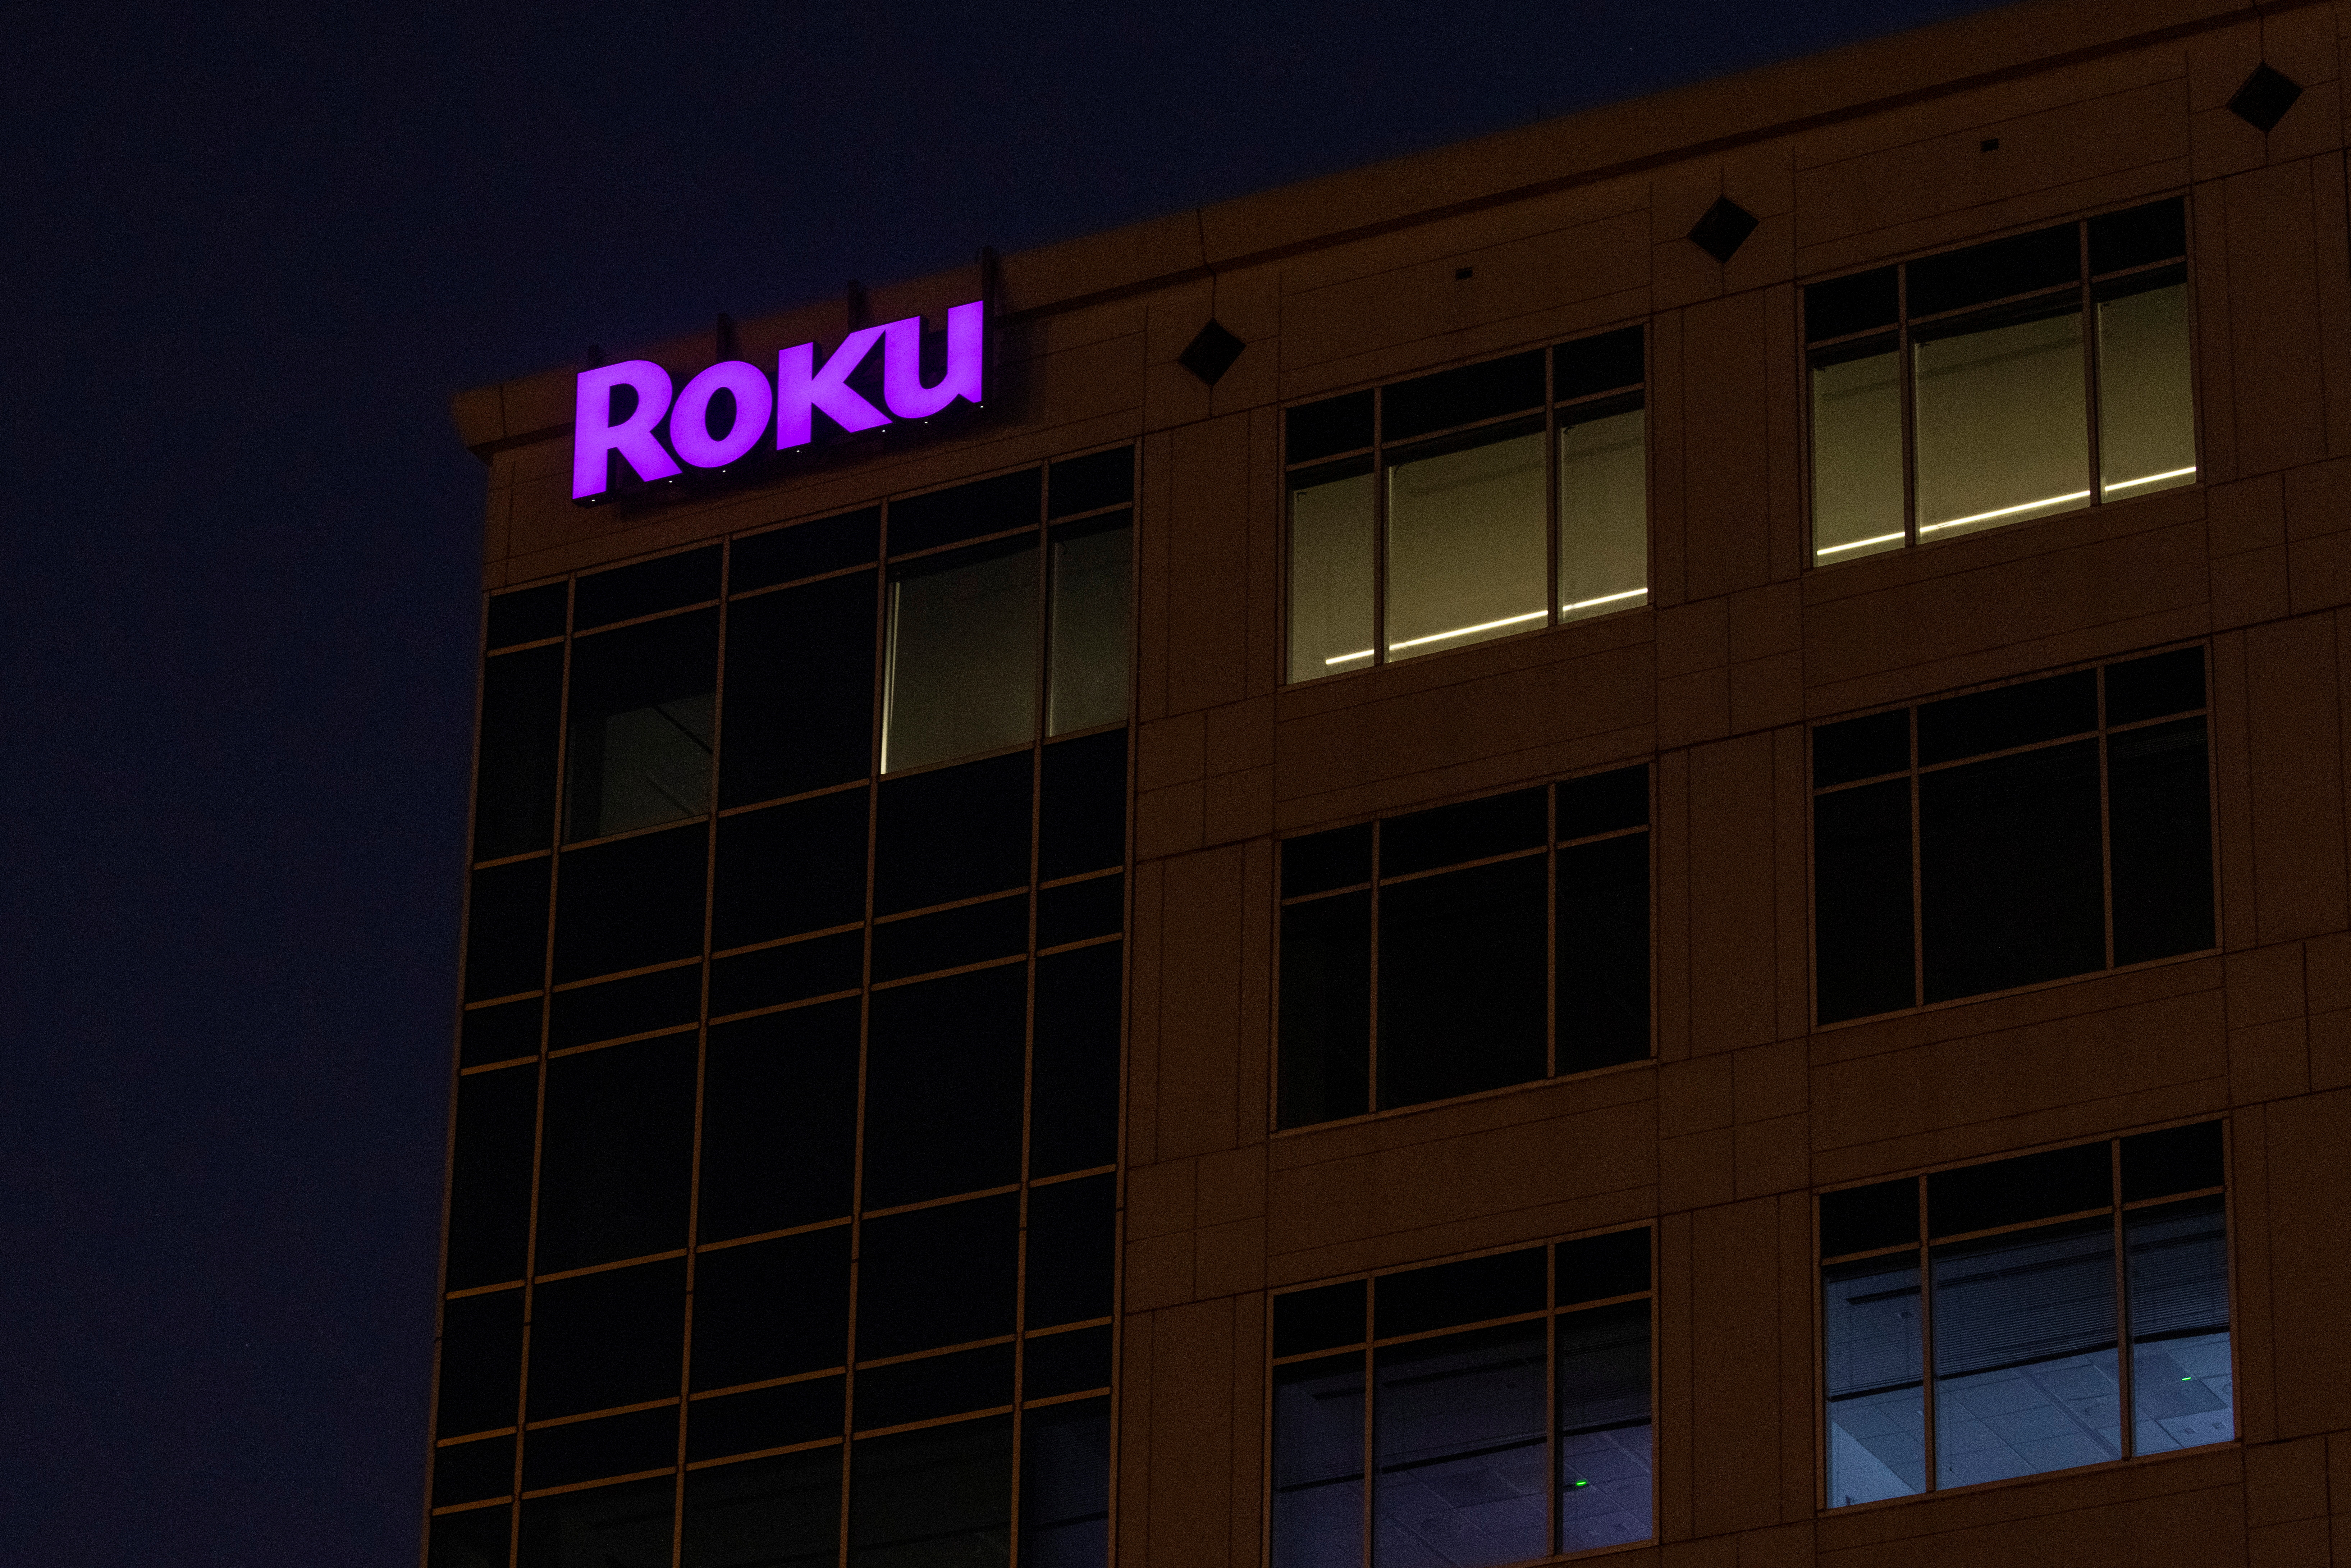 The Roku company logo is displayed on a building in Austin, Texas, U.S., October 25, 2021. REUTERS/Mike Blake